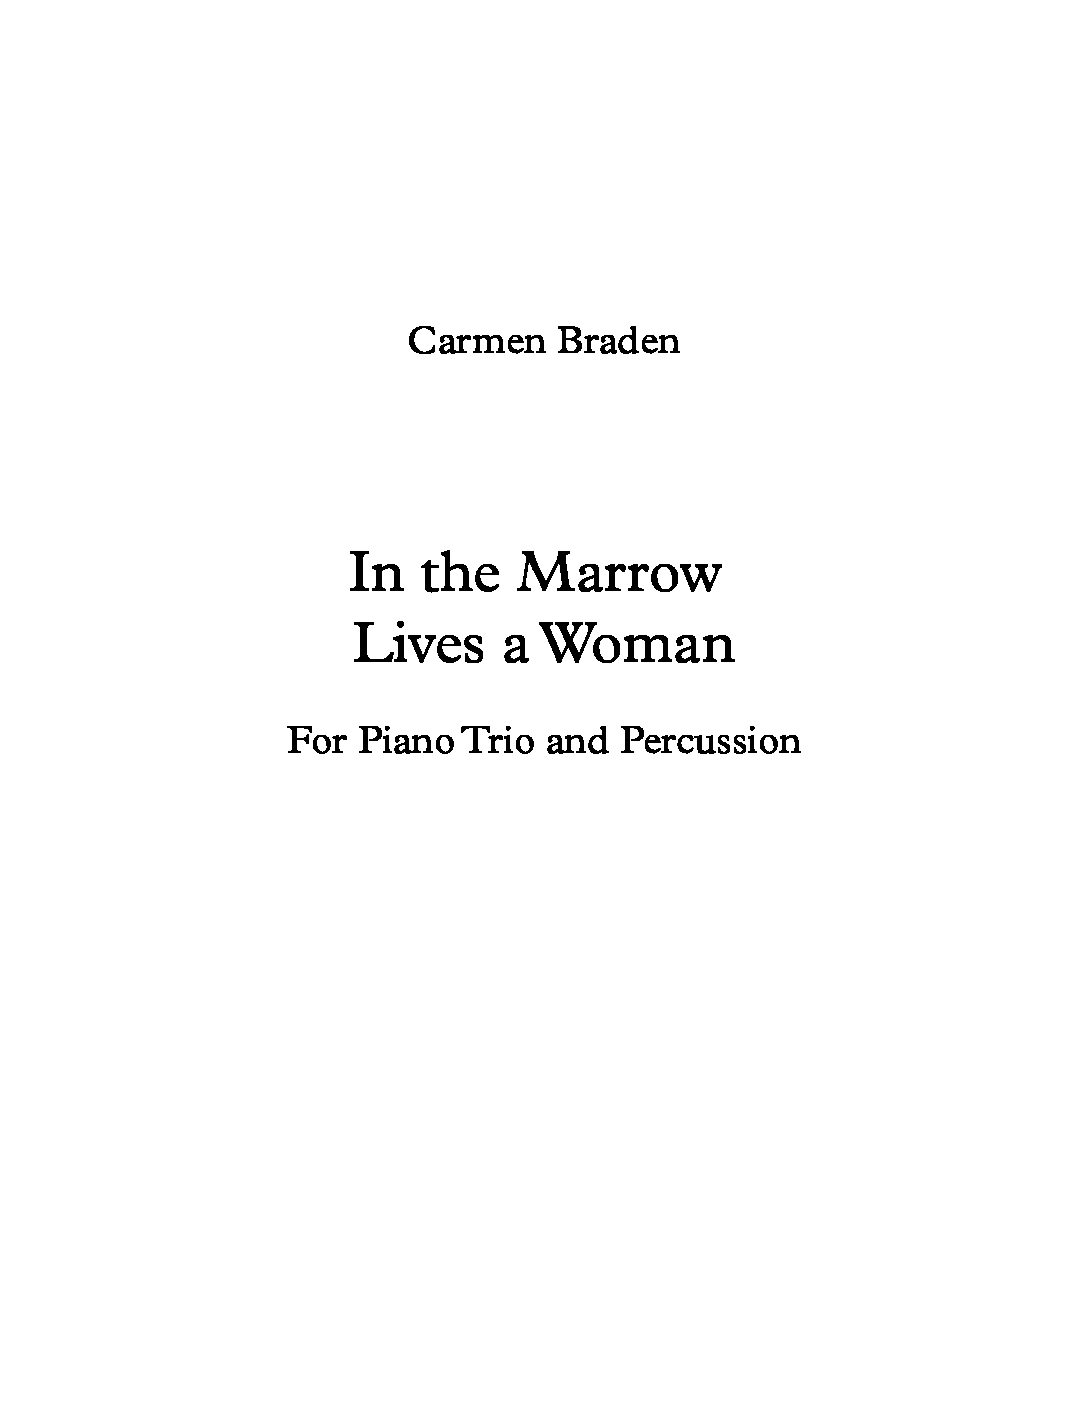 In the Marrow Lives a Woman - Post Recording - Full Score-6p